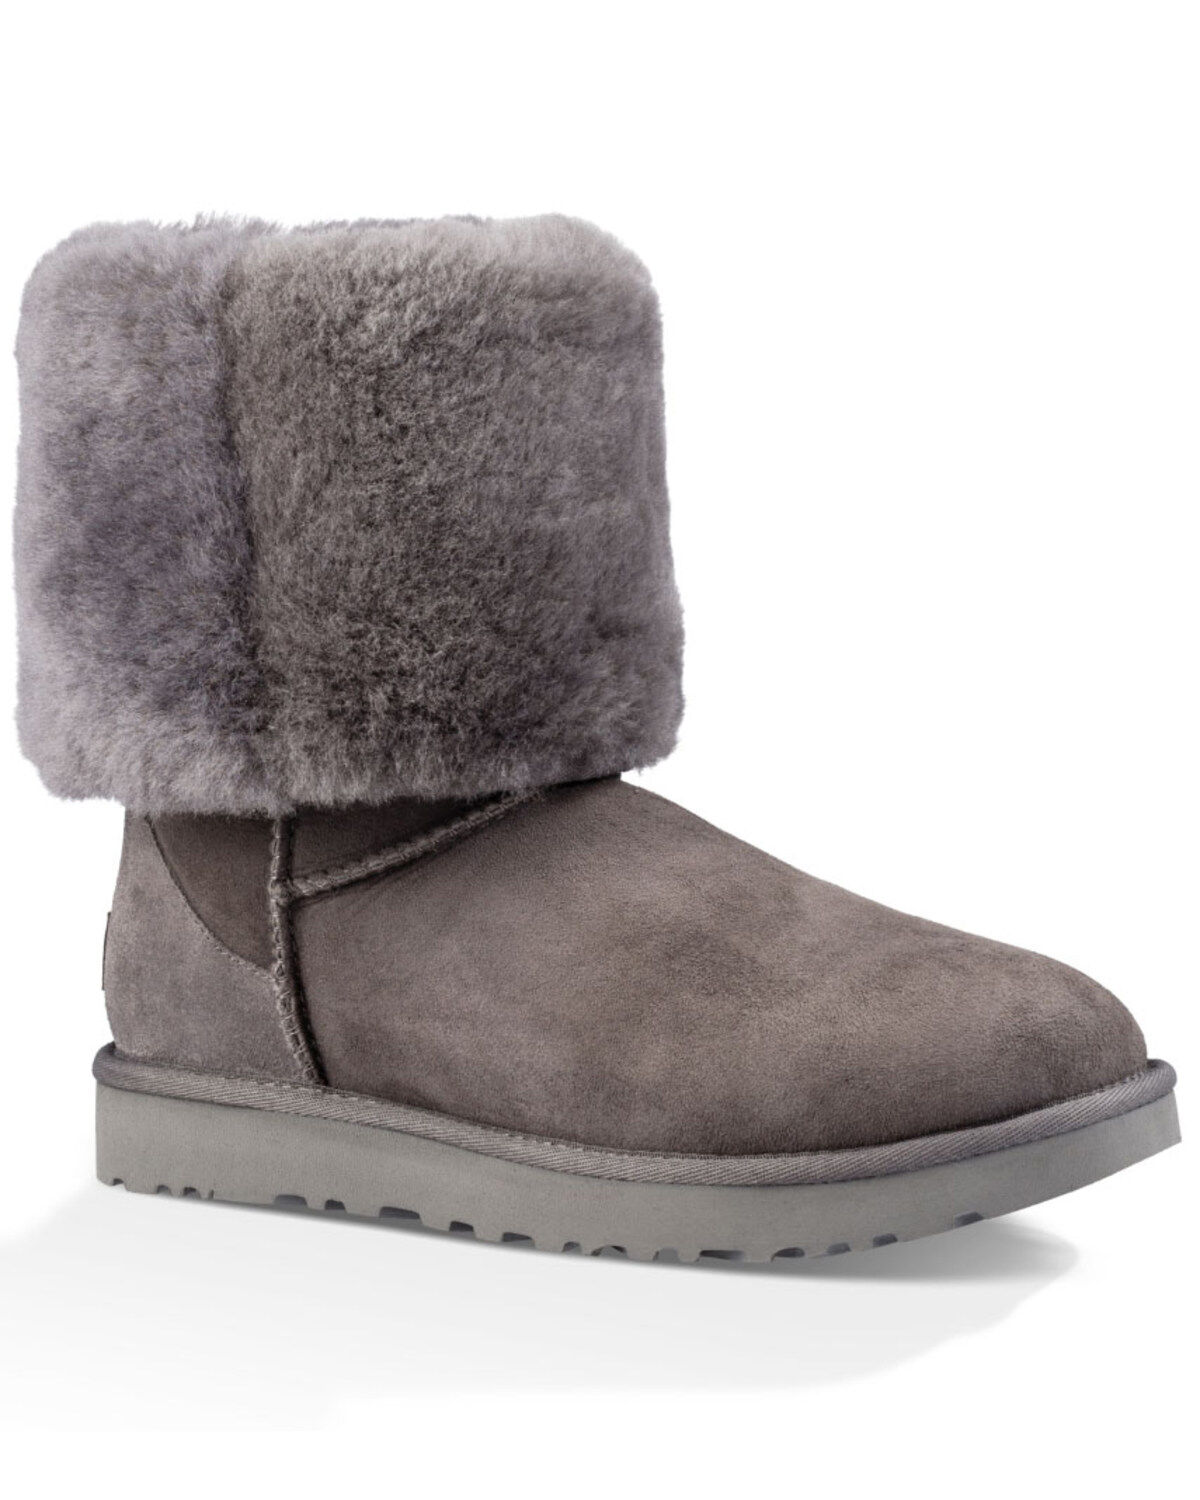 womens gray ugg boots